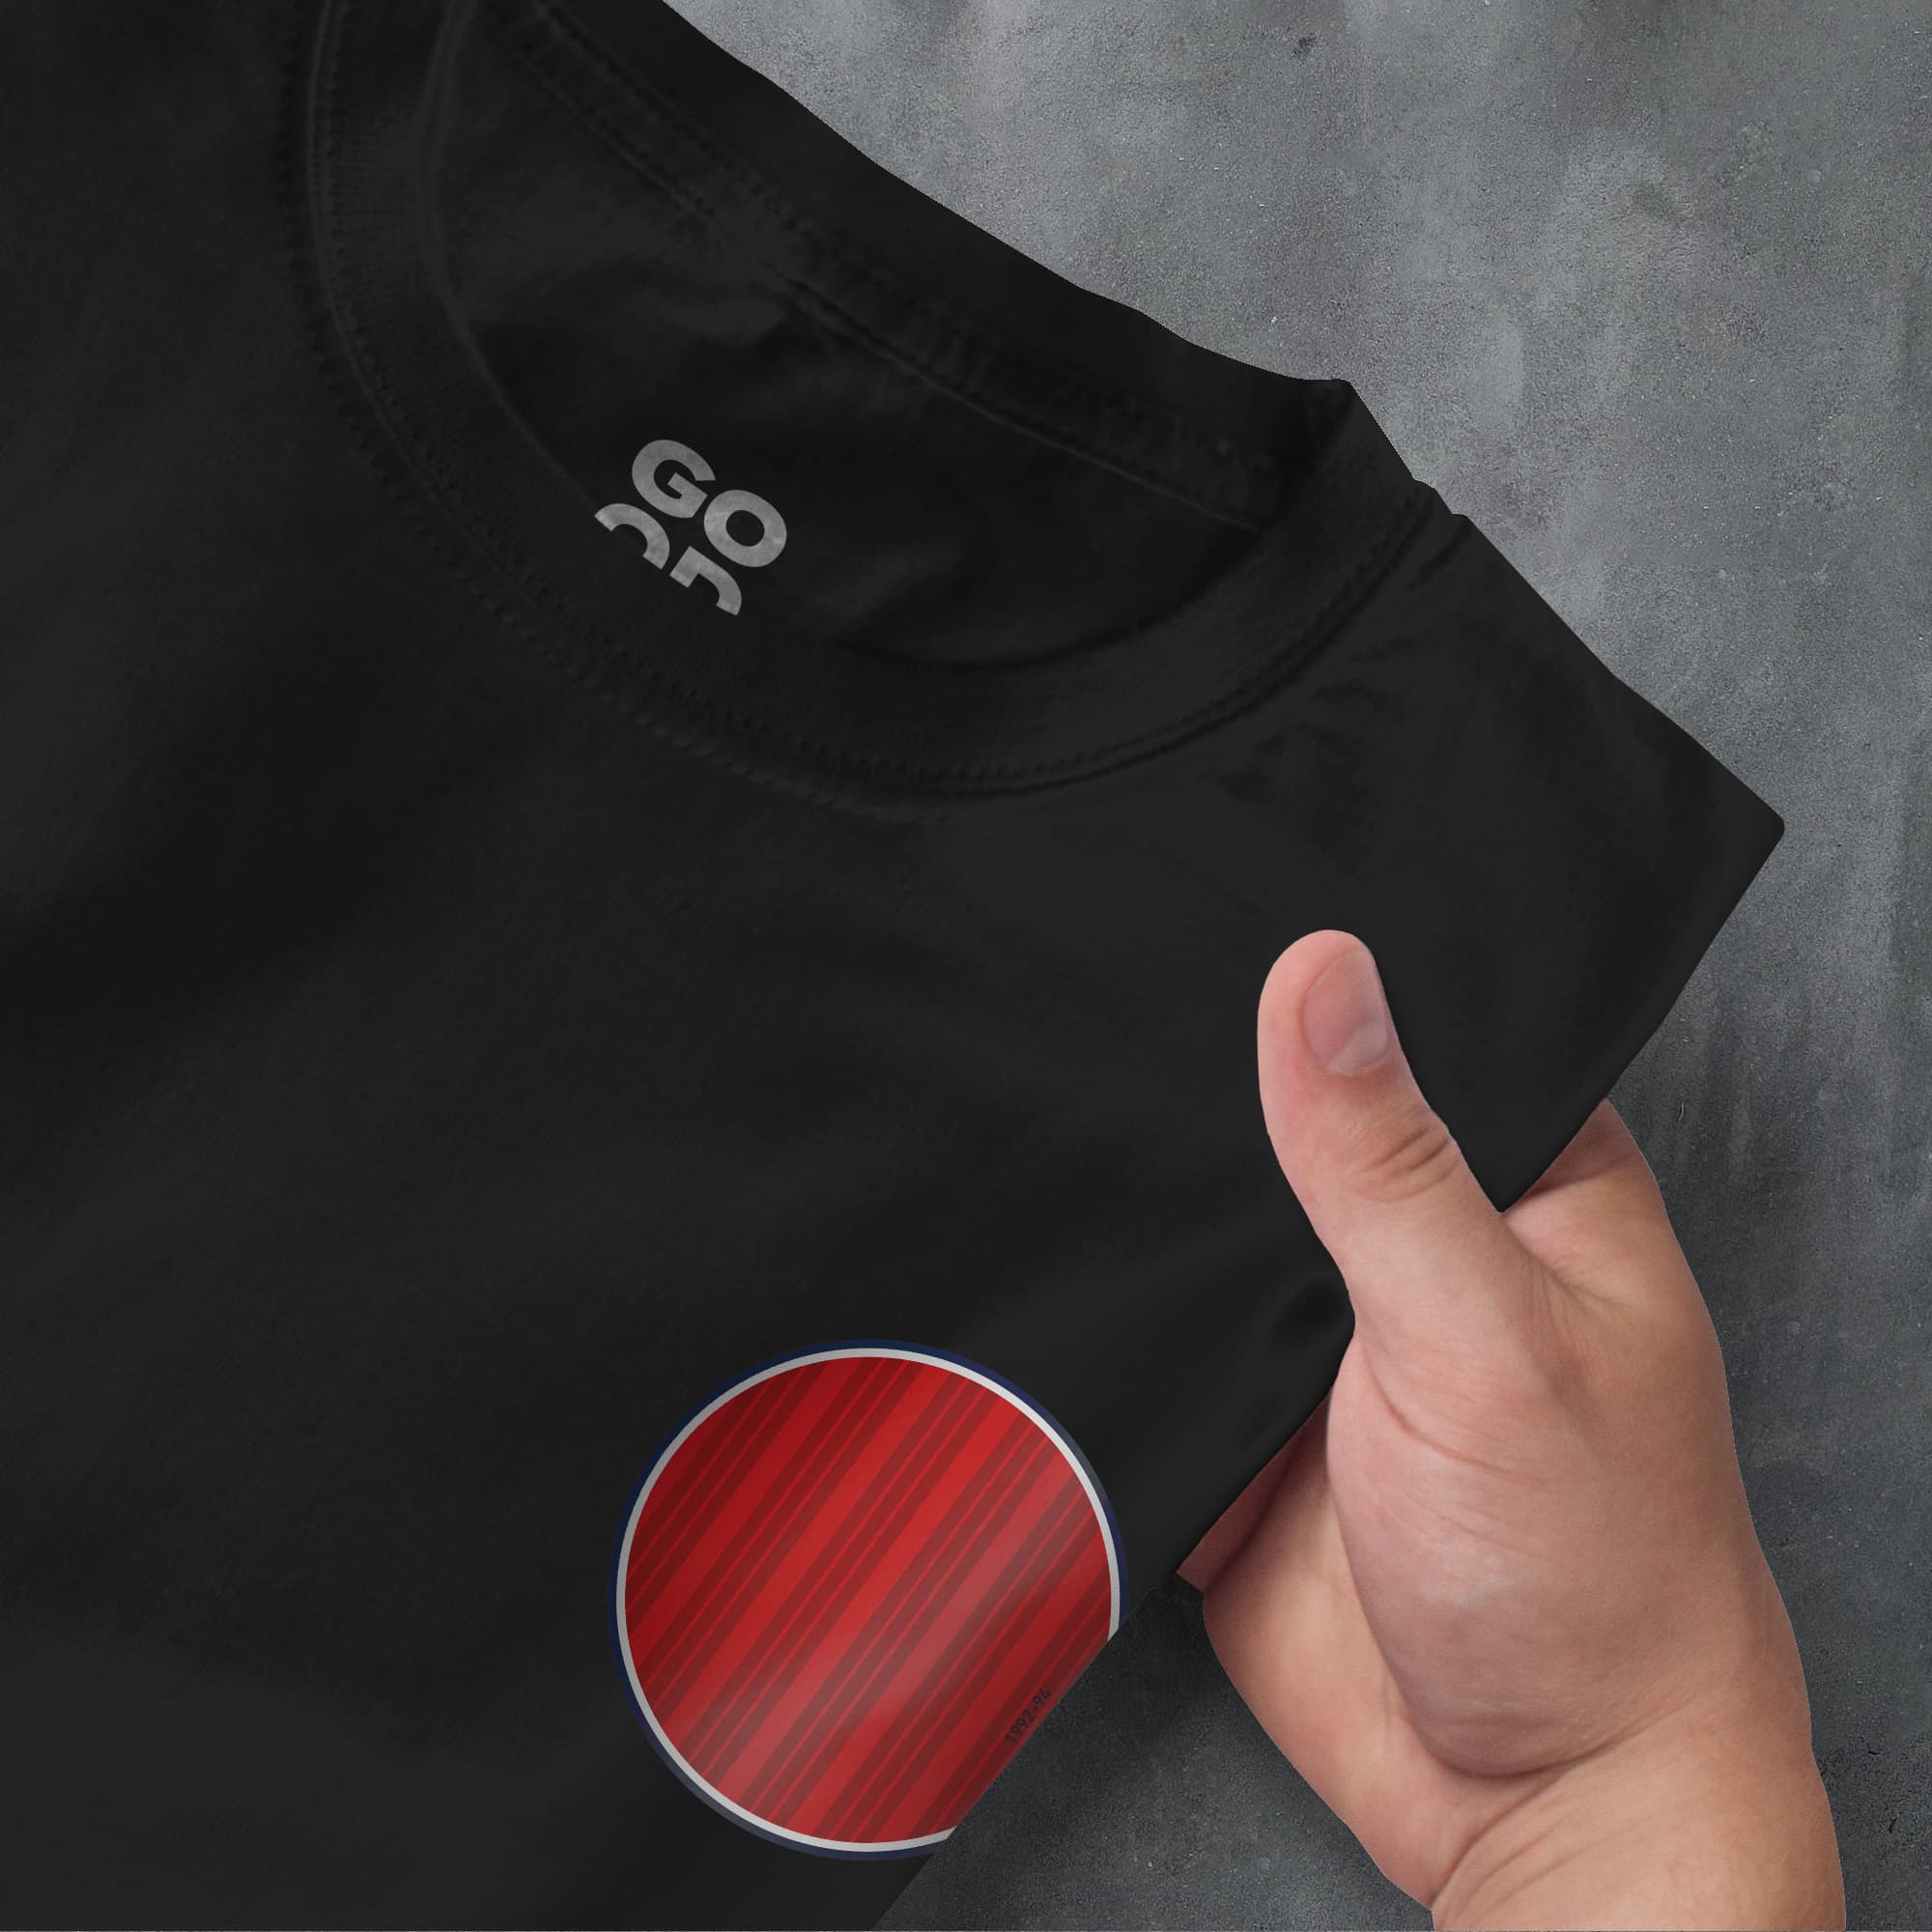 a person pointing at a red circle on a black shirt